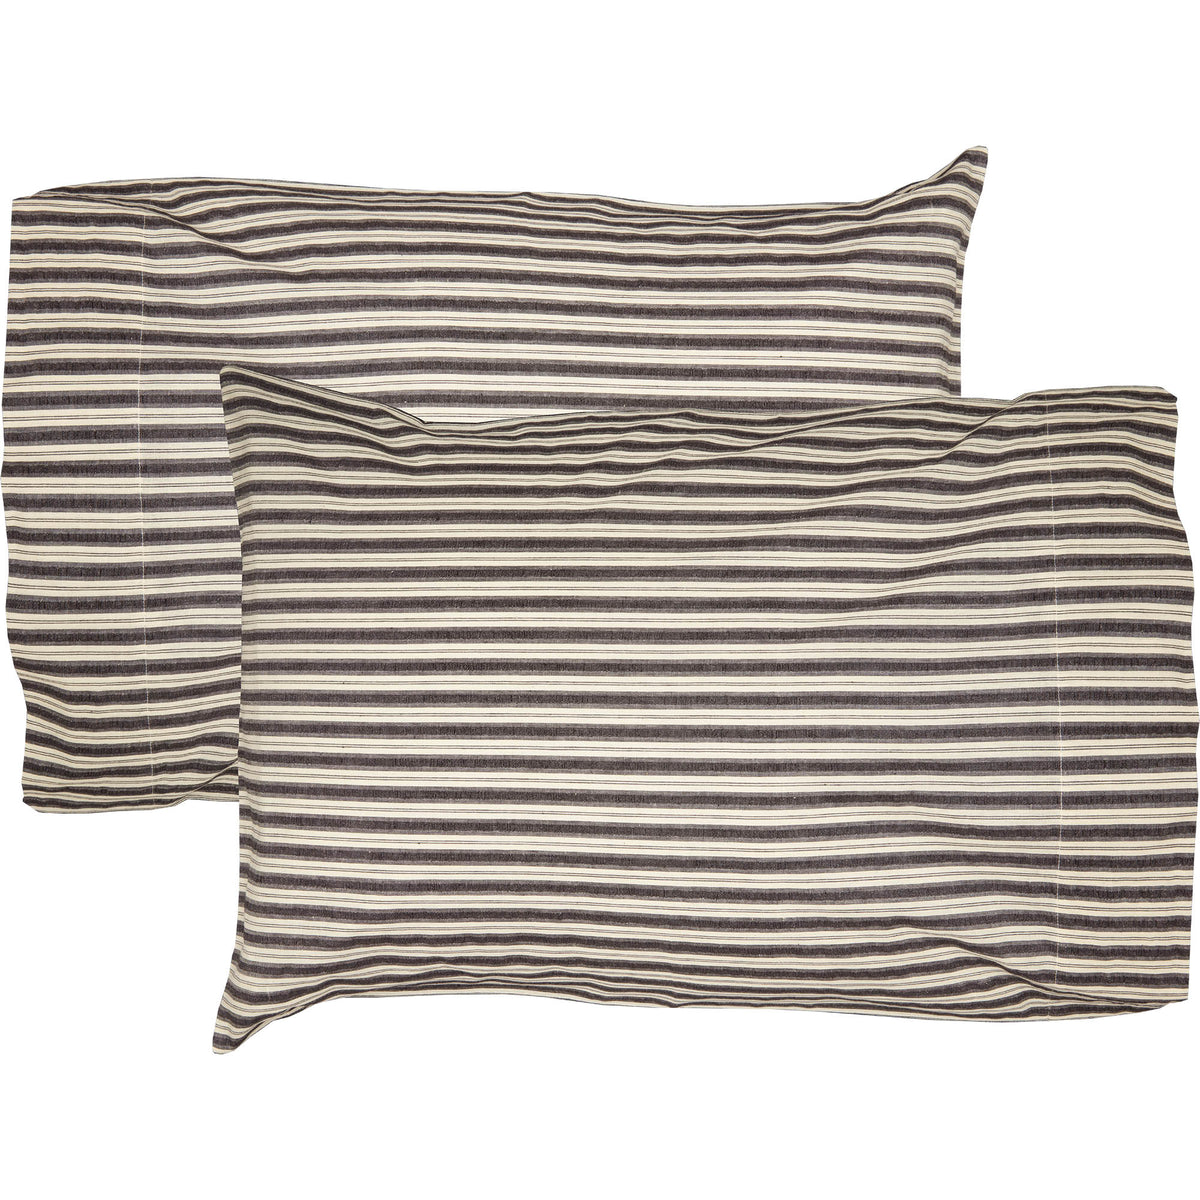 April & Olive Ashmont Ticking Stripe Standard Pillow Case Set of 2 21x30 By VHC Brands